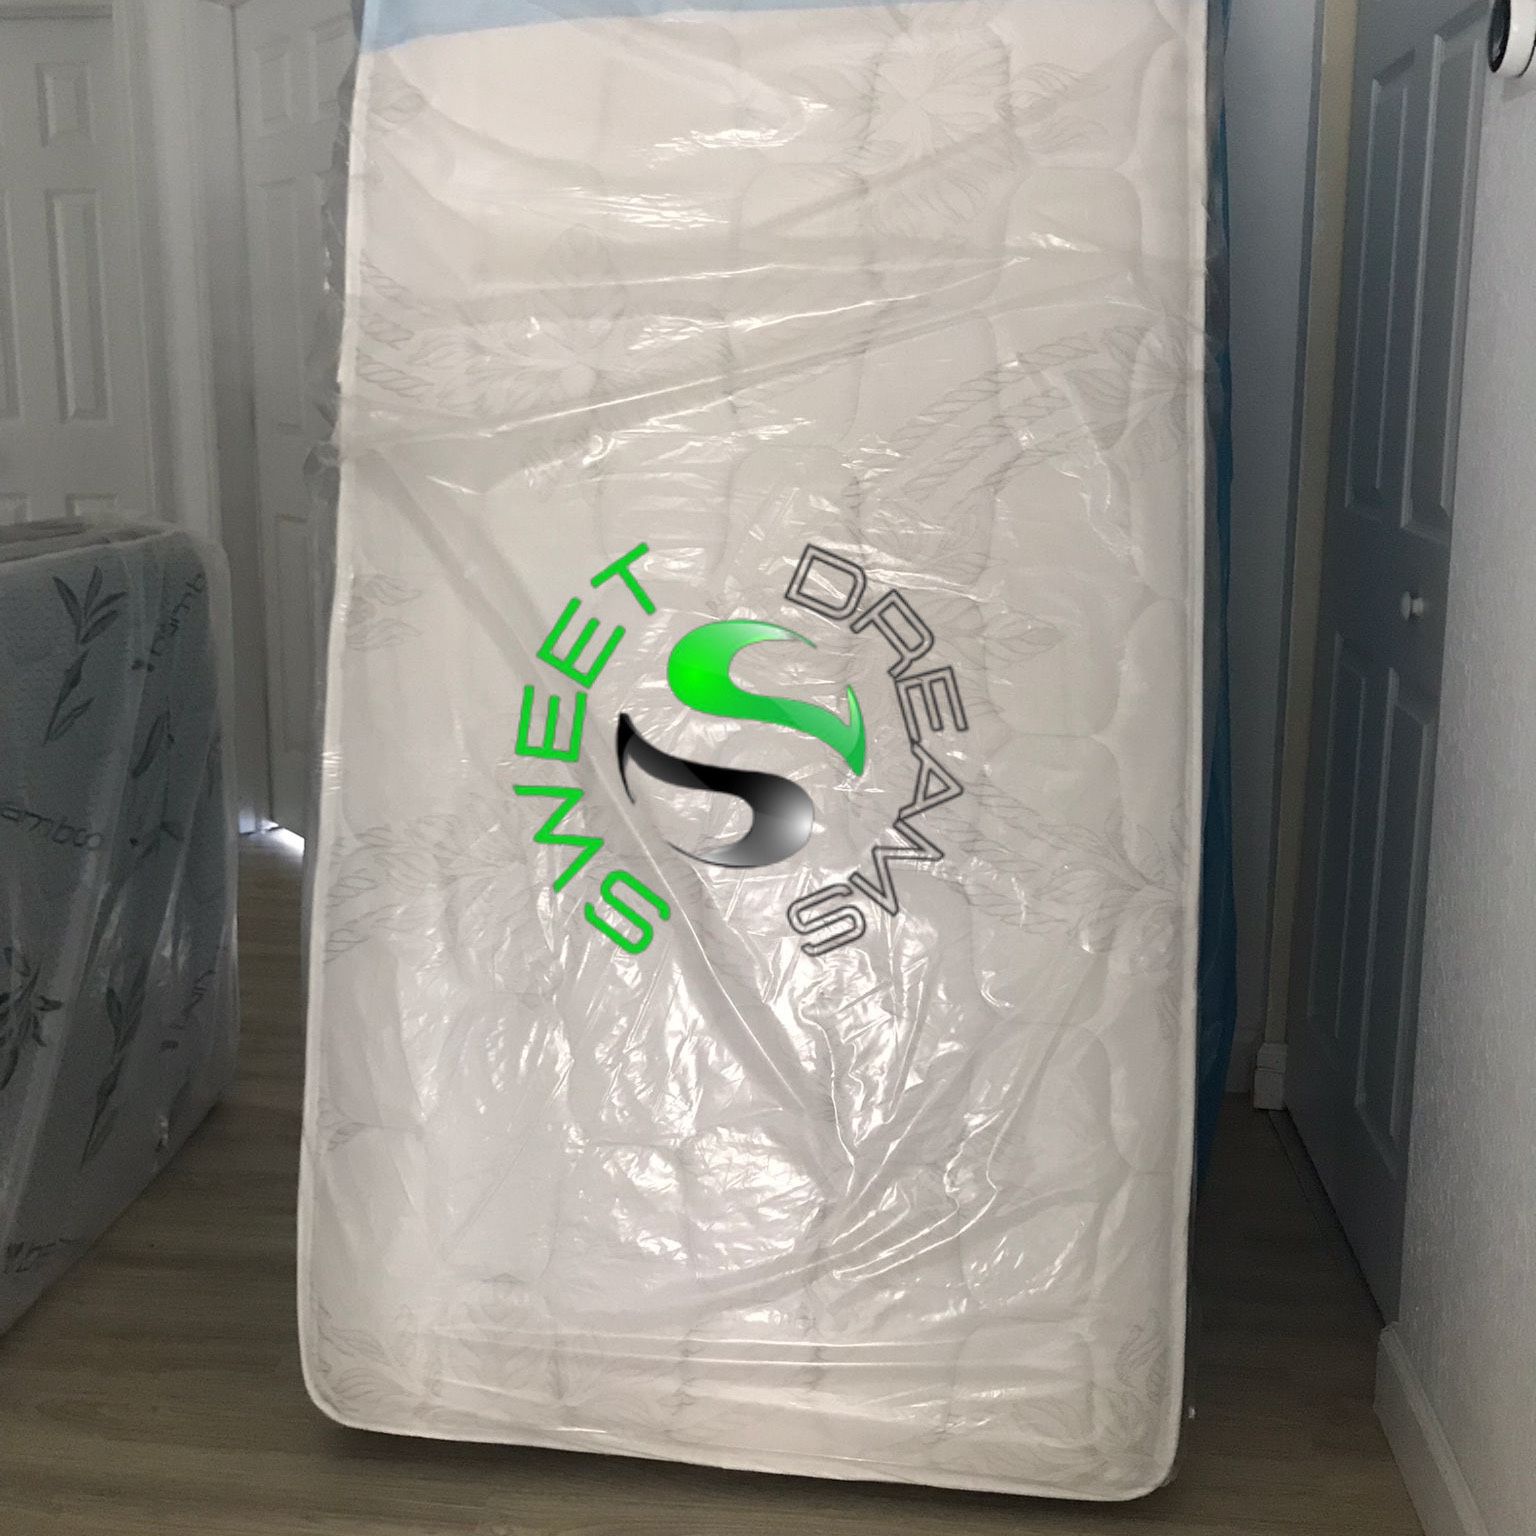 KING QUEEN FULL TWIN SIZE MATTRESS  PILLOW TOP WRAPPED IN PLASTIC ALL NEW AVAILABLE BOX SPRING AND METAL FRAME COLCHONES NUEVOS 🛏️